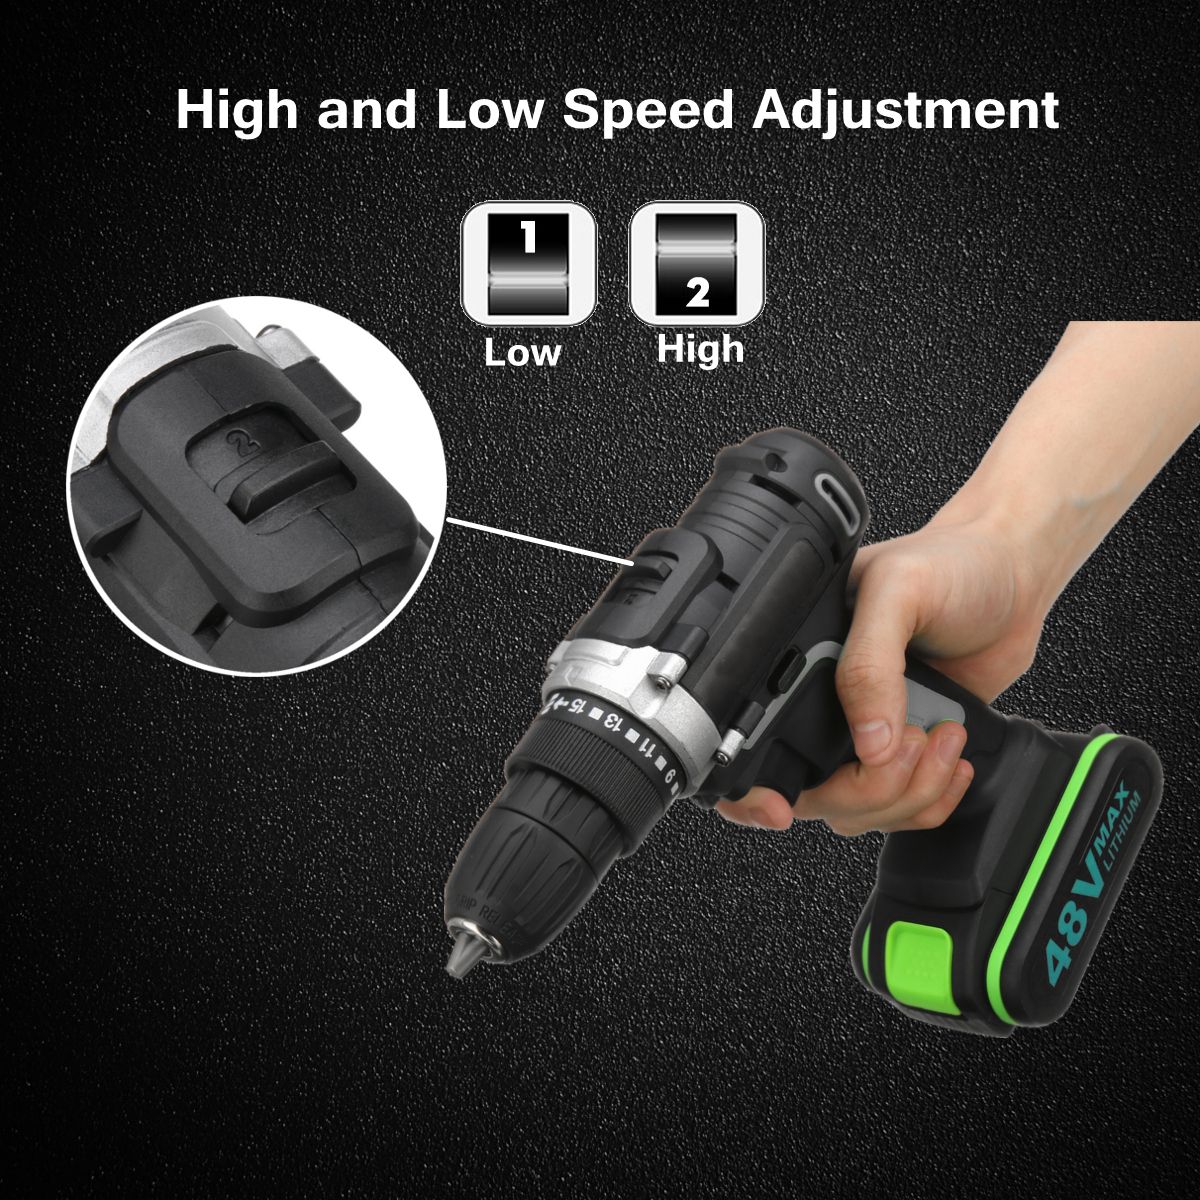 48V-18-Gear-Power-Drills-Cordless-Electric-Drill-2-Speed-LED-lighting-Powerful-Driling-Tool-1452966